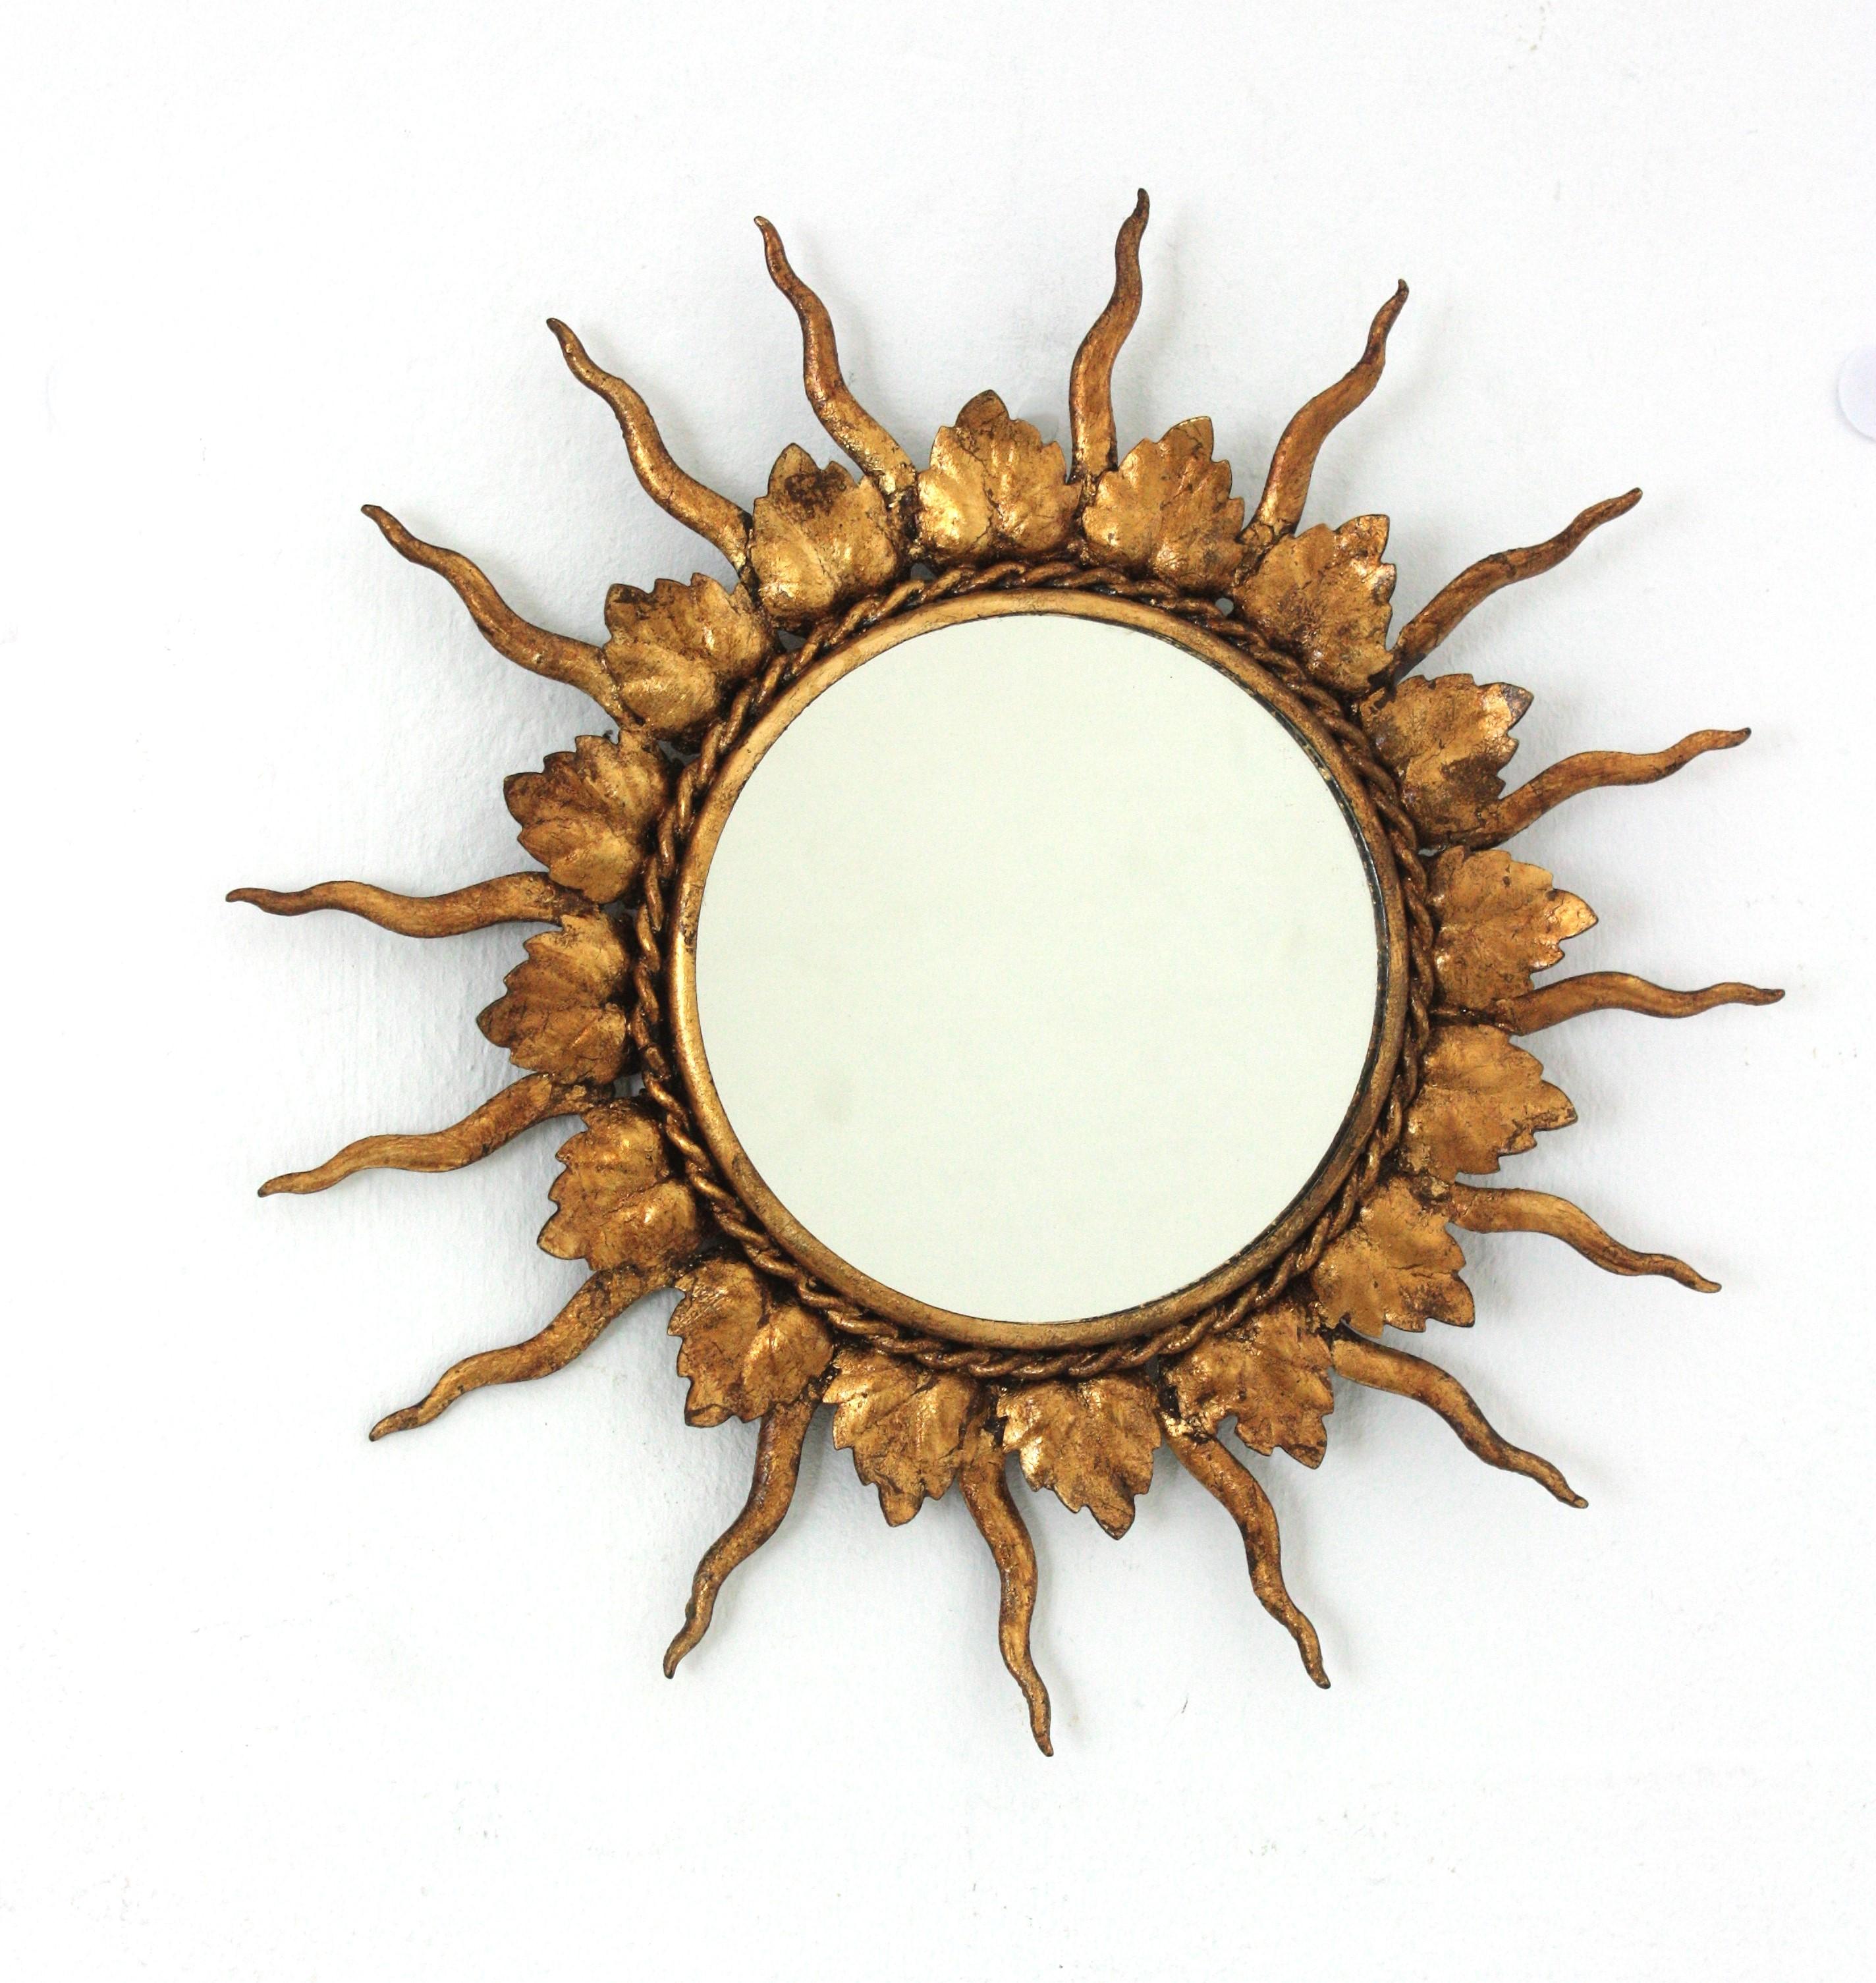 Mini sized sunburst mirror in gilt iron. France, 1950s
Lovely handcrafted gilt iron mini sunburst mirror. The frame is comprised by alternating iron leaves and rays finished with gold leaf gilding.
Unusual piece due to its small size.
Beautiful